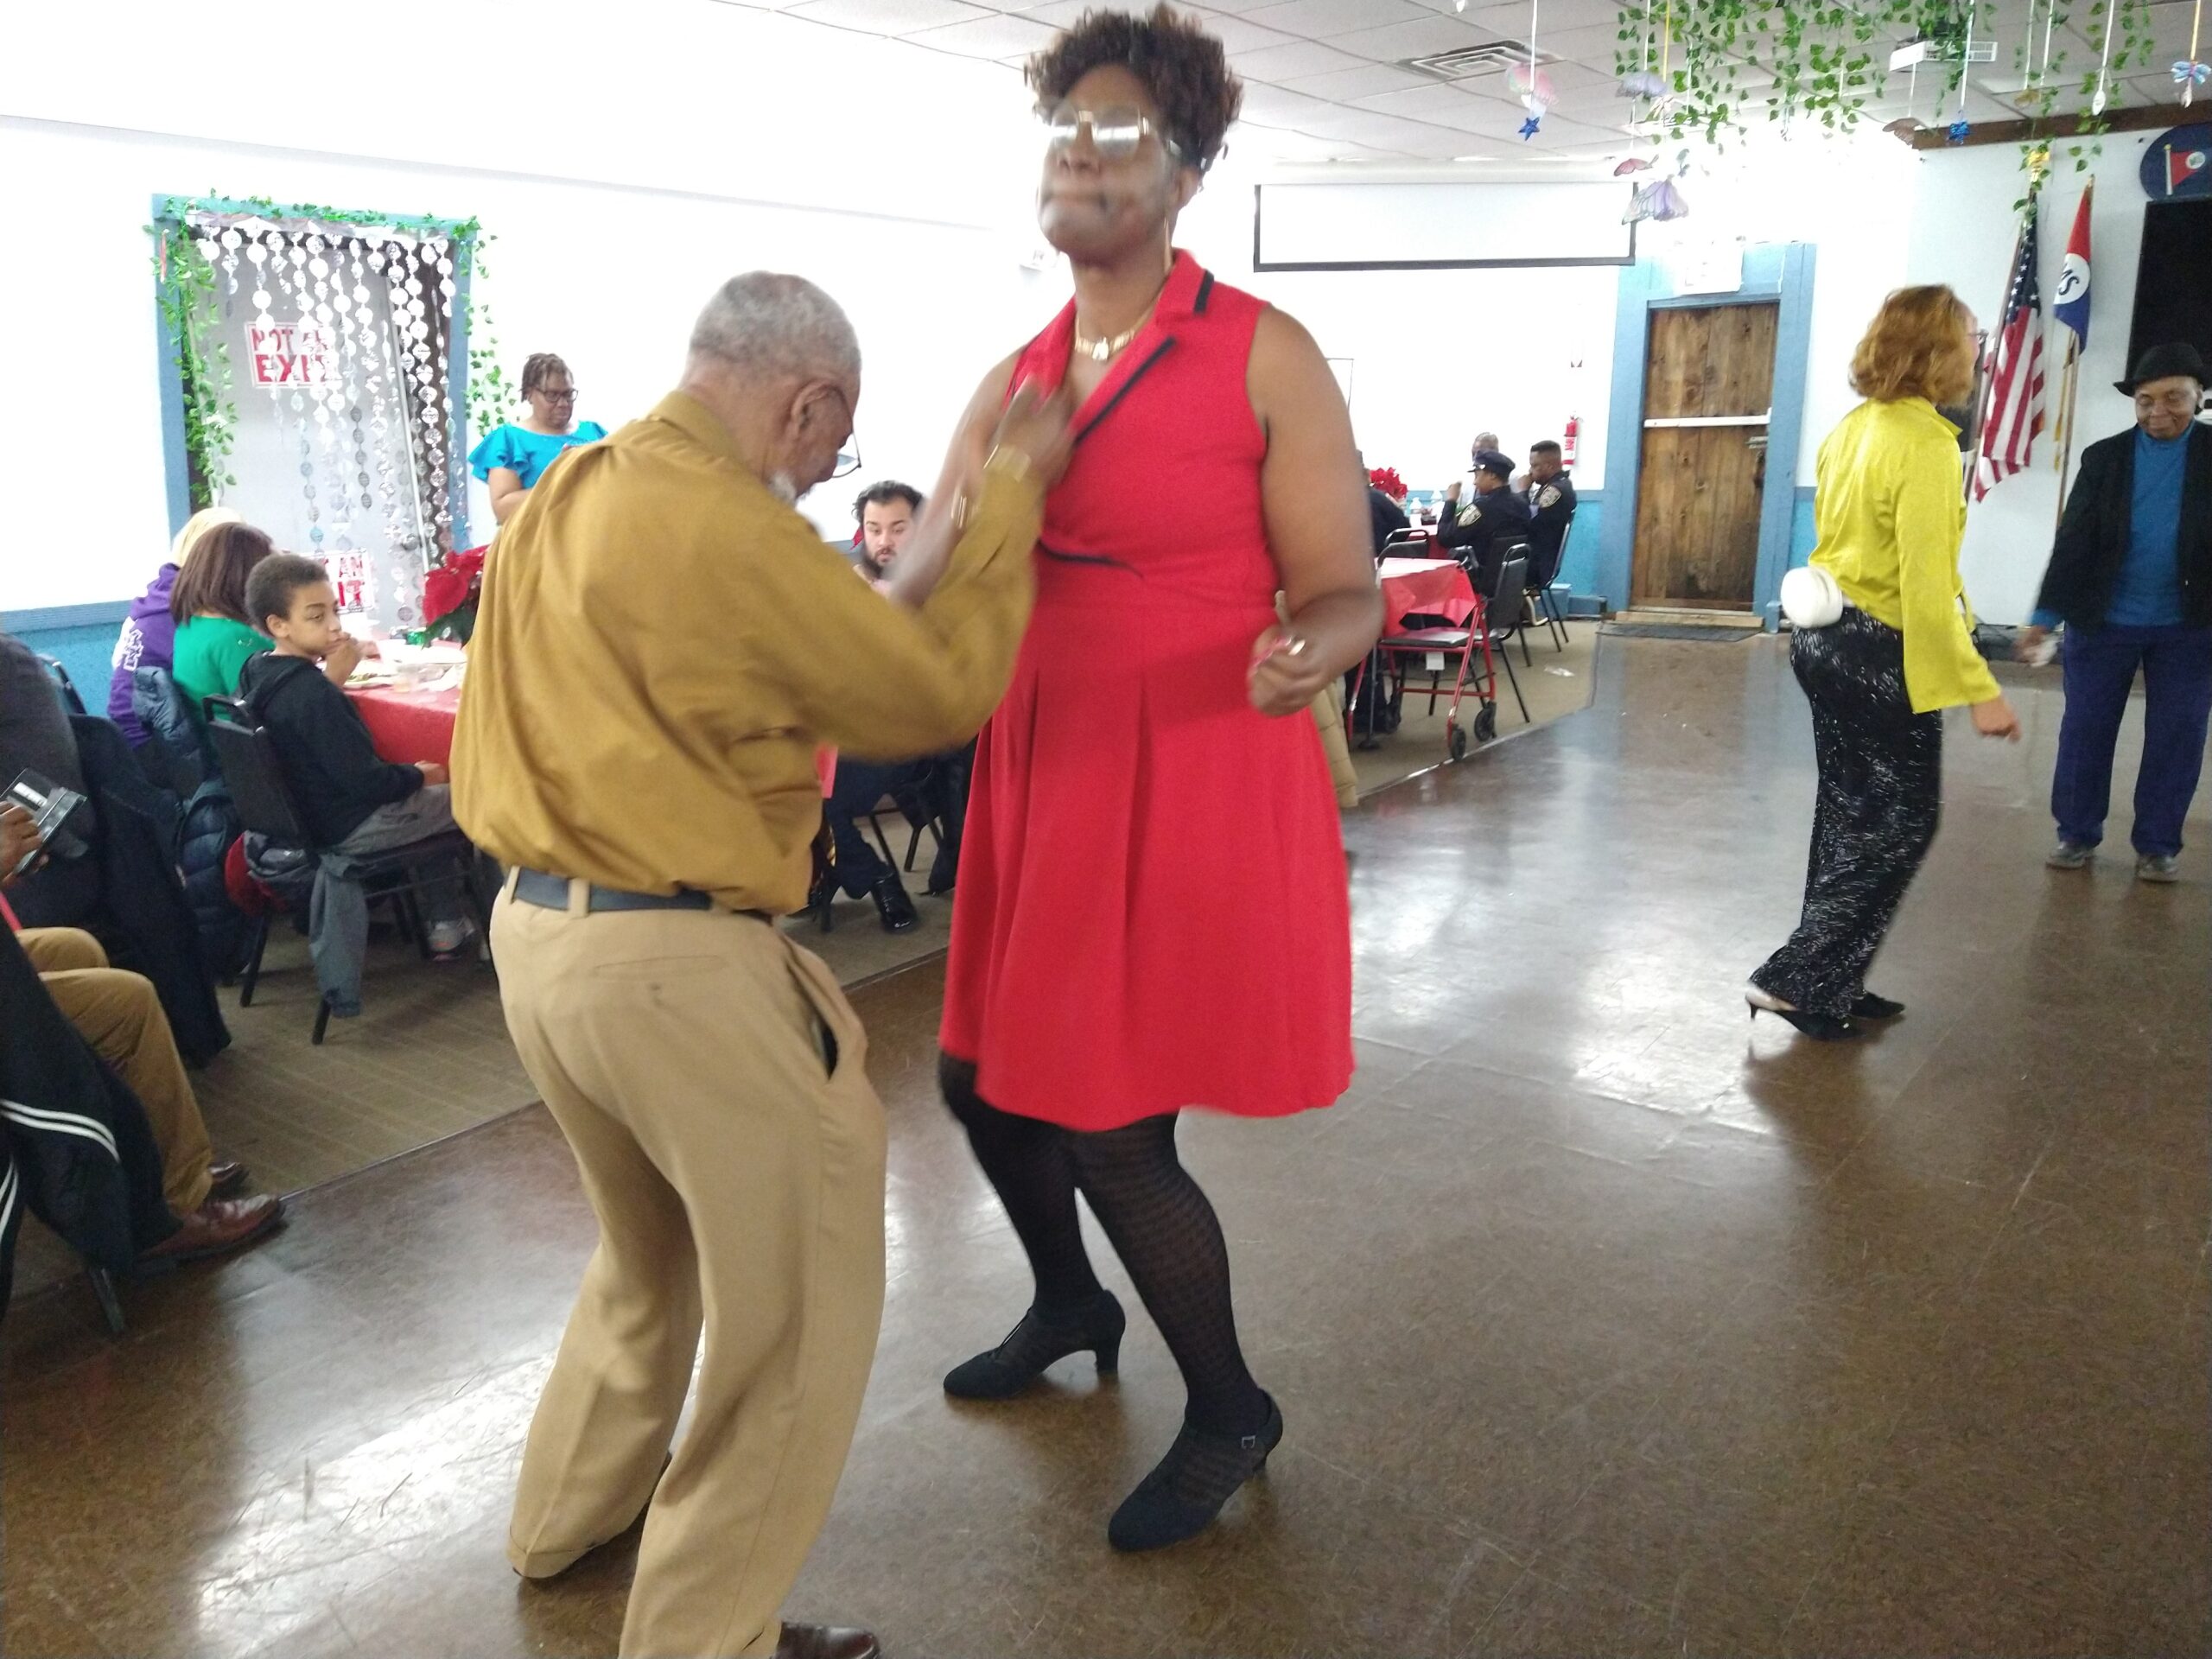 Dancers at 69th Precinct Community Council’s annual holiday celebration.